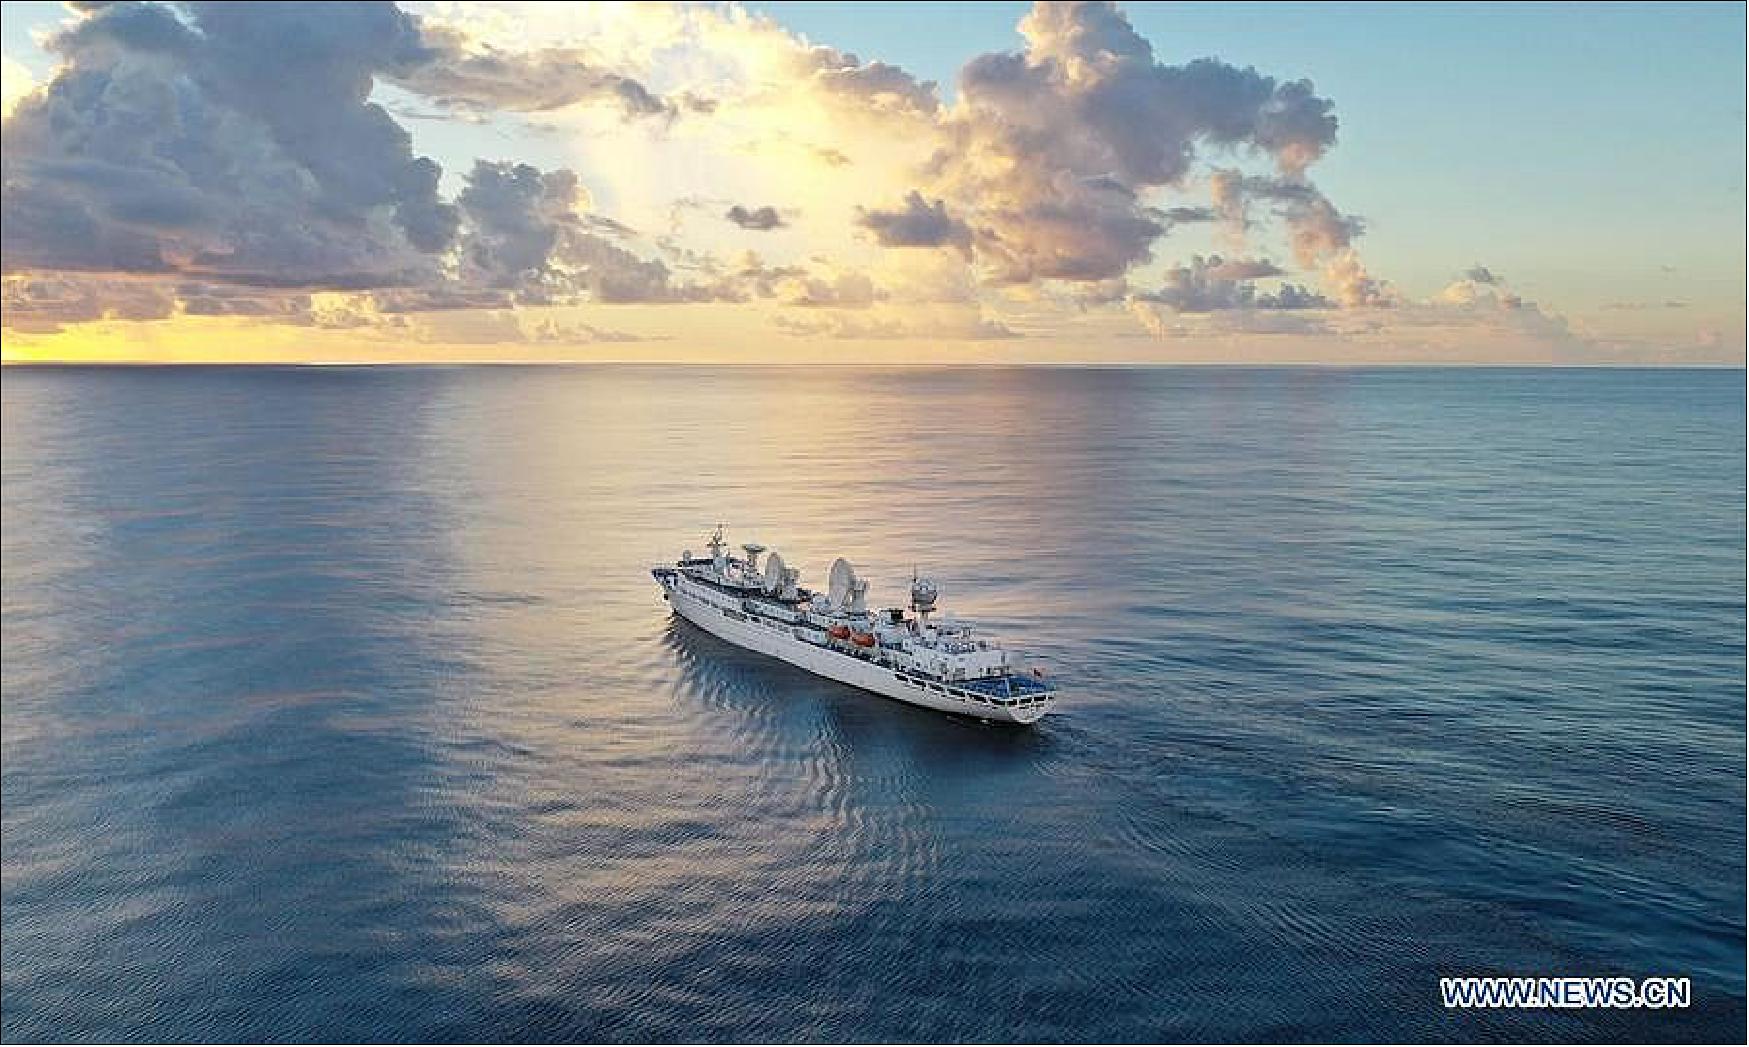 Figure 7: Aerial photo shows China's spacecraft tracking ship Yuanwang 3 sailing on the Pacific Ocean, on June 21, 2019 (image credit: Xinhua)